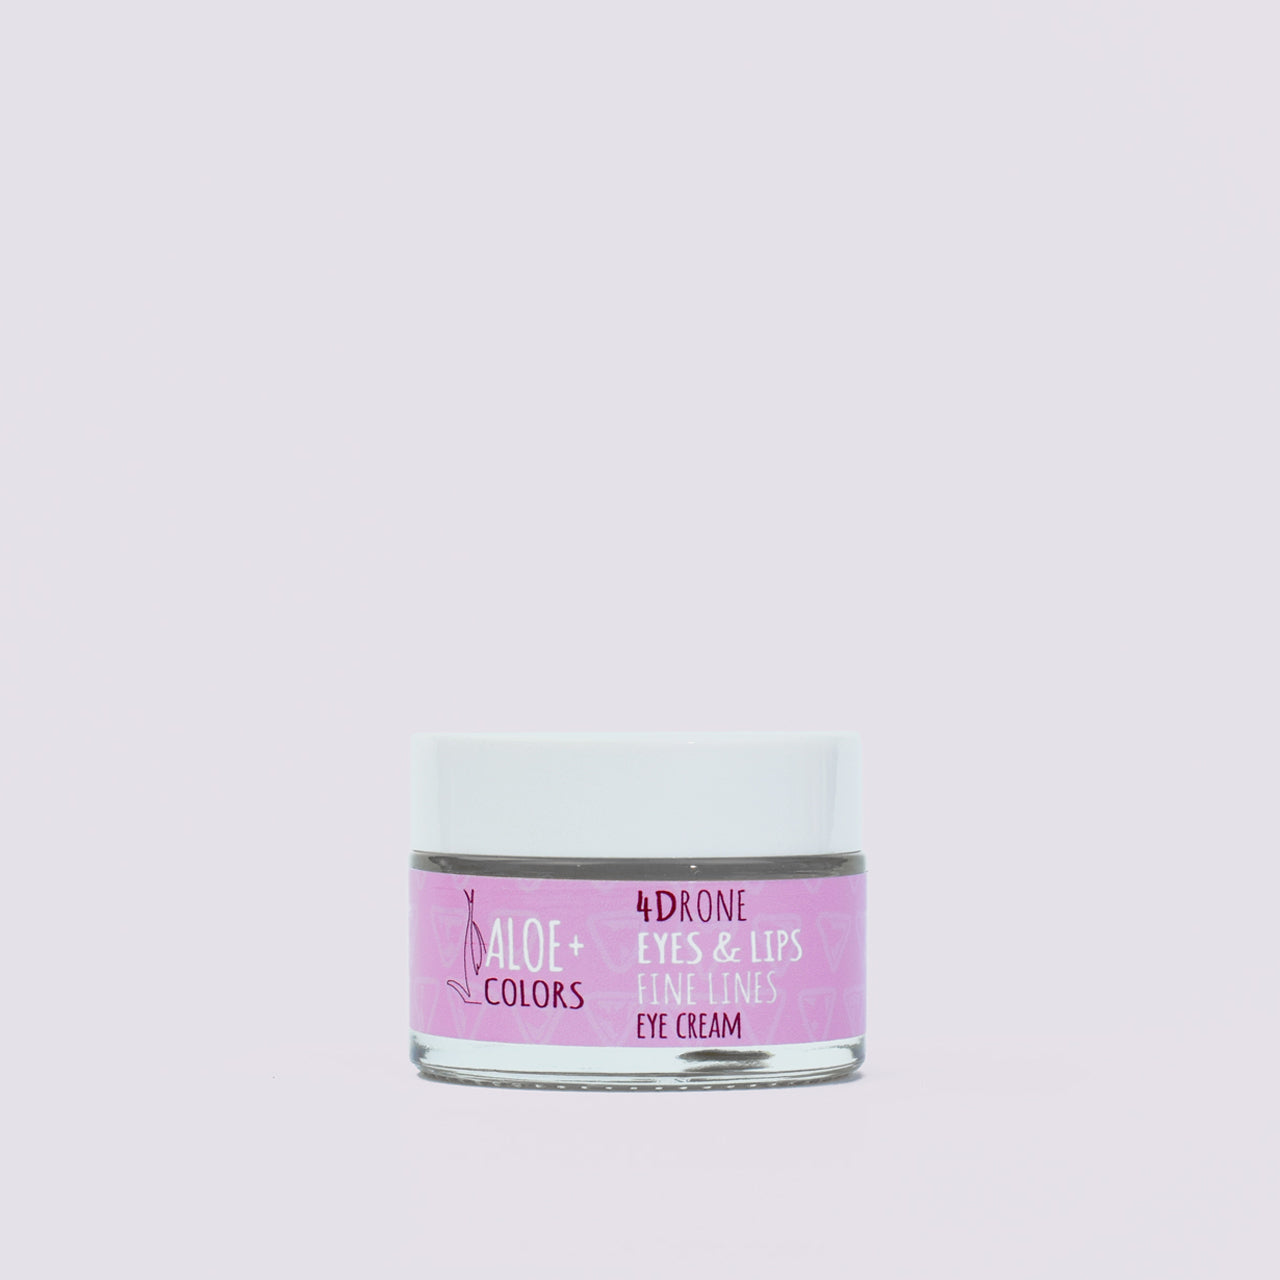 Eyes and Lips Cream for fine lines